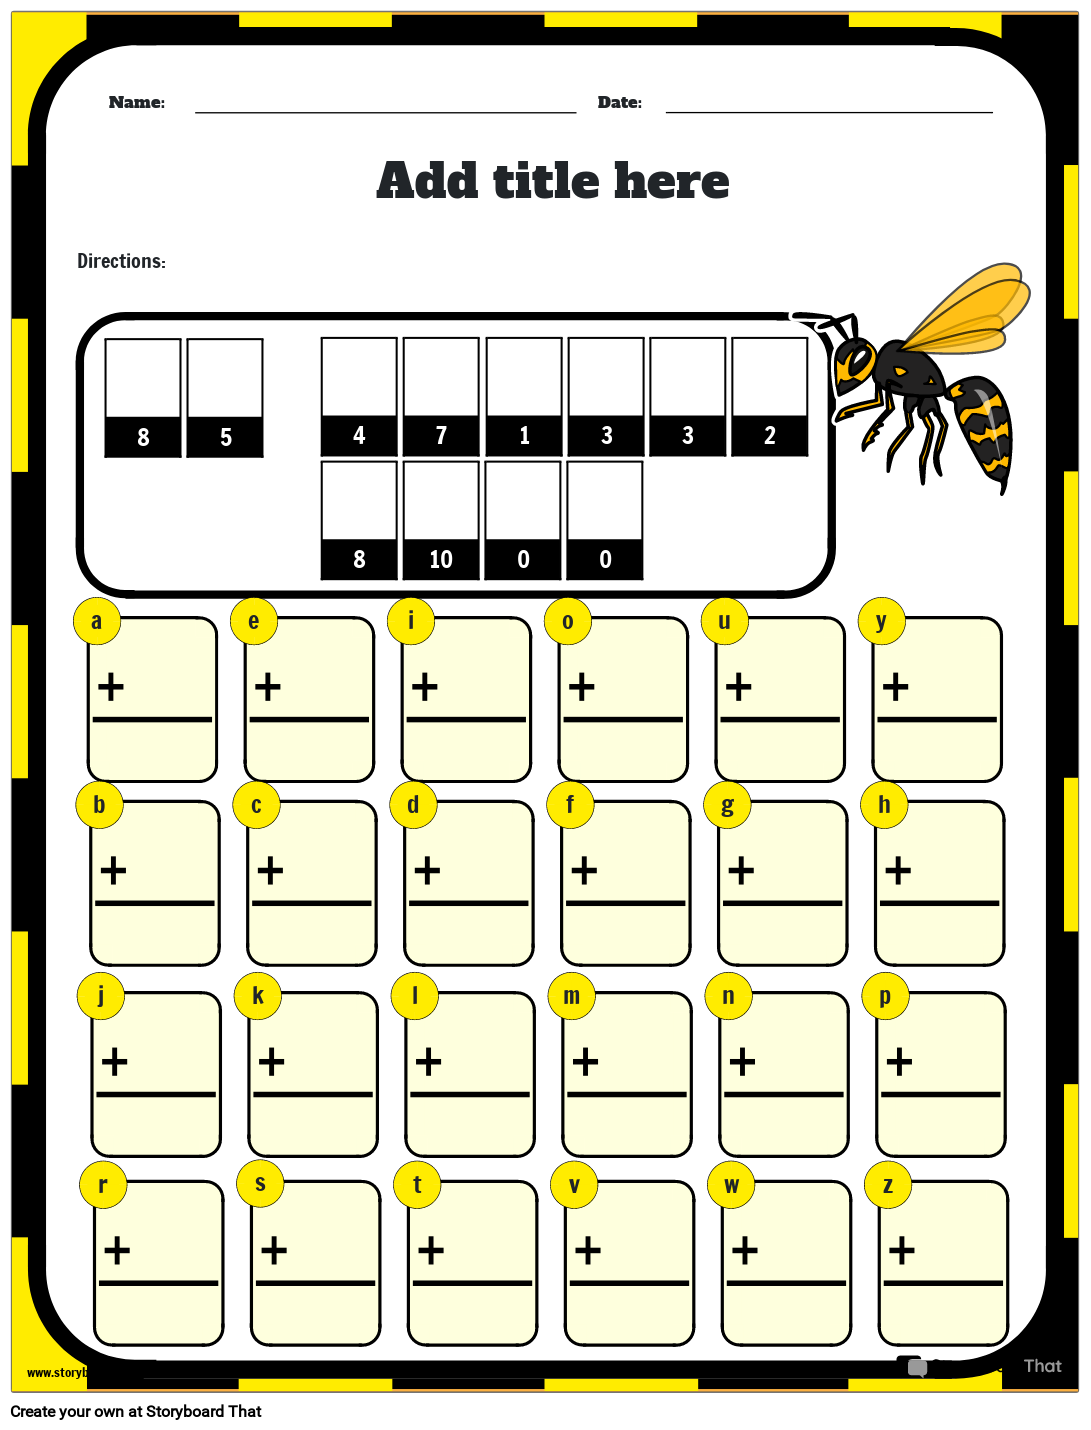 How do Bees go to school - Math Riddle Worksheet